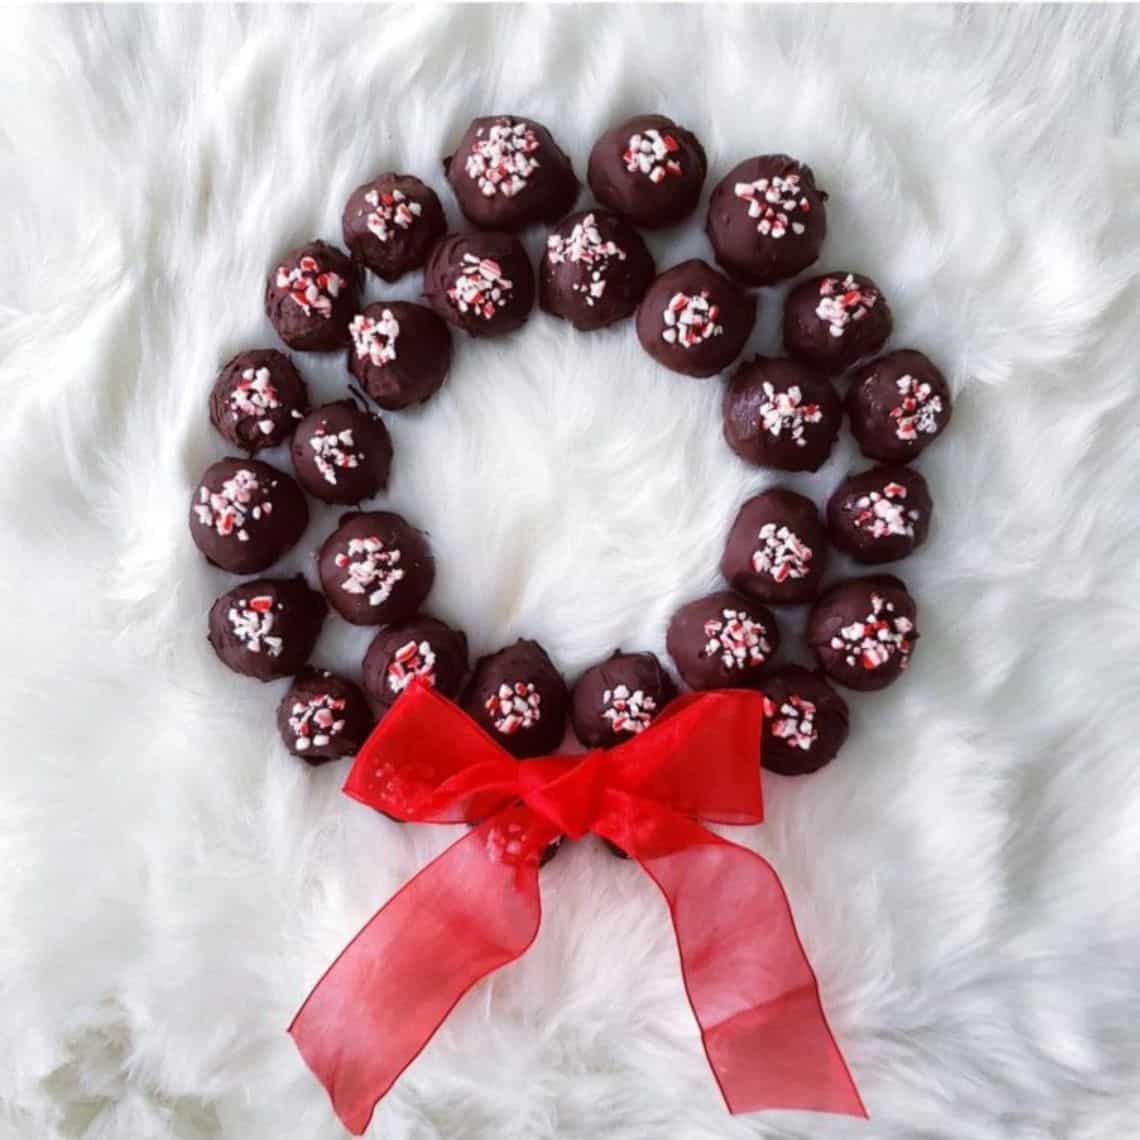 Chocolate balls with candy cane topping arranged in wreath shape with a red bow.